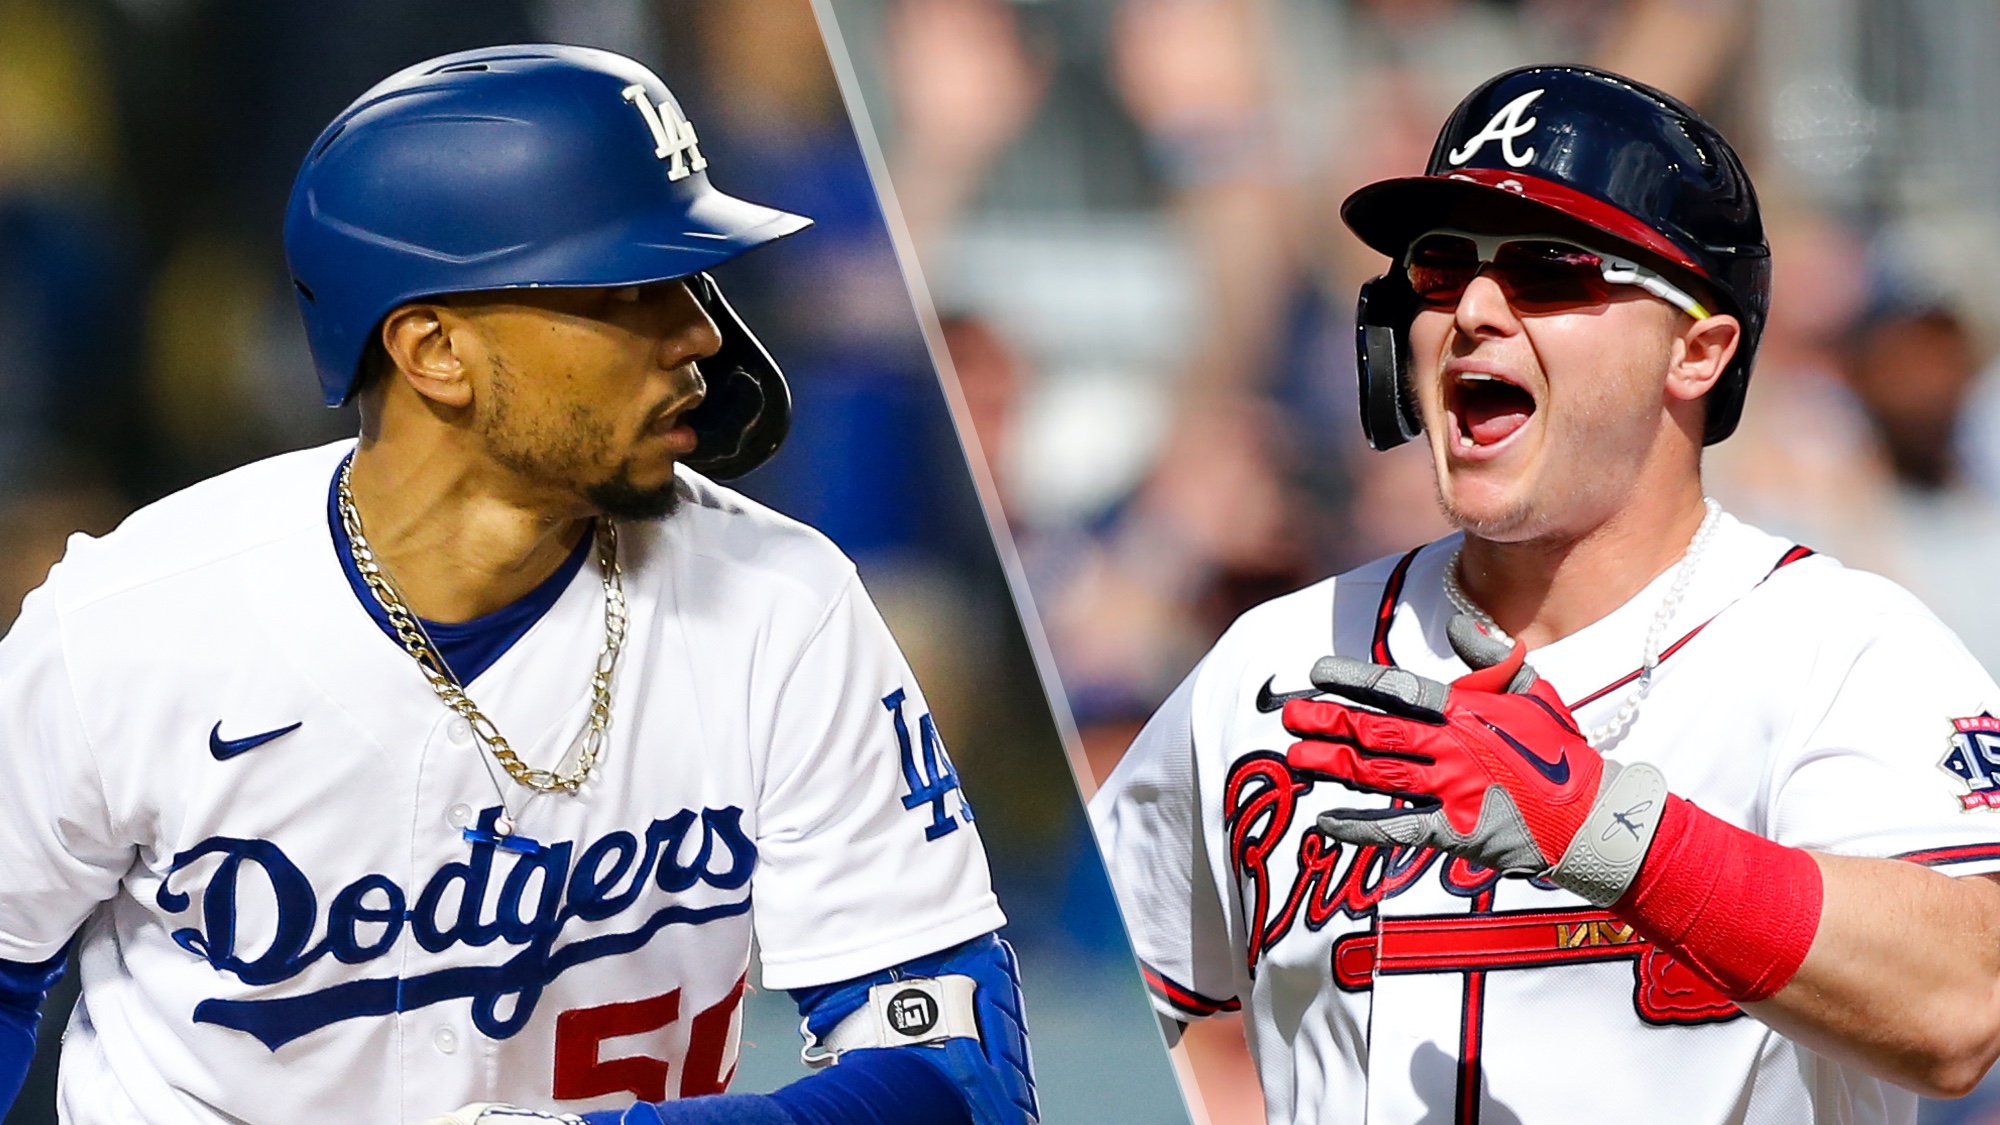 Dodgers vs Braves live stream is here How to watch the NLCS Game 1